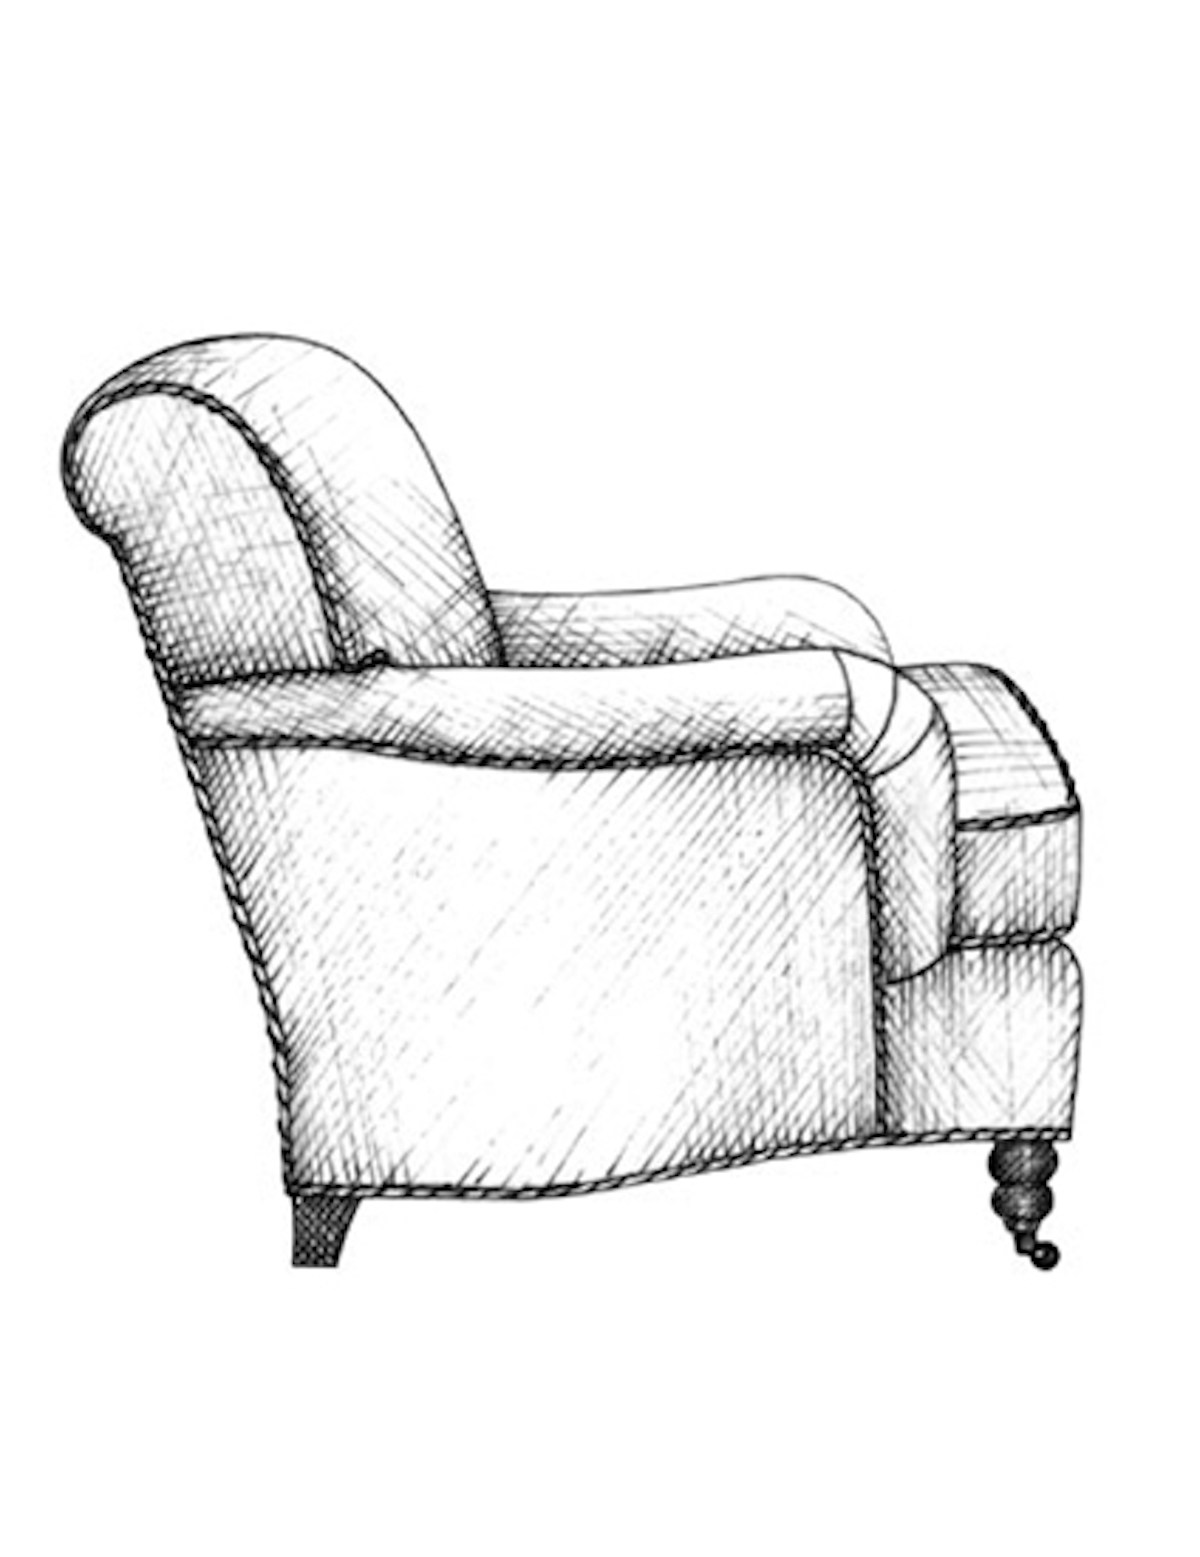 The Best of Chair Design - Top 10 Chair Styles - English roll arm chair